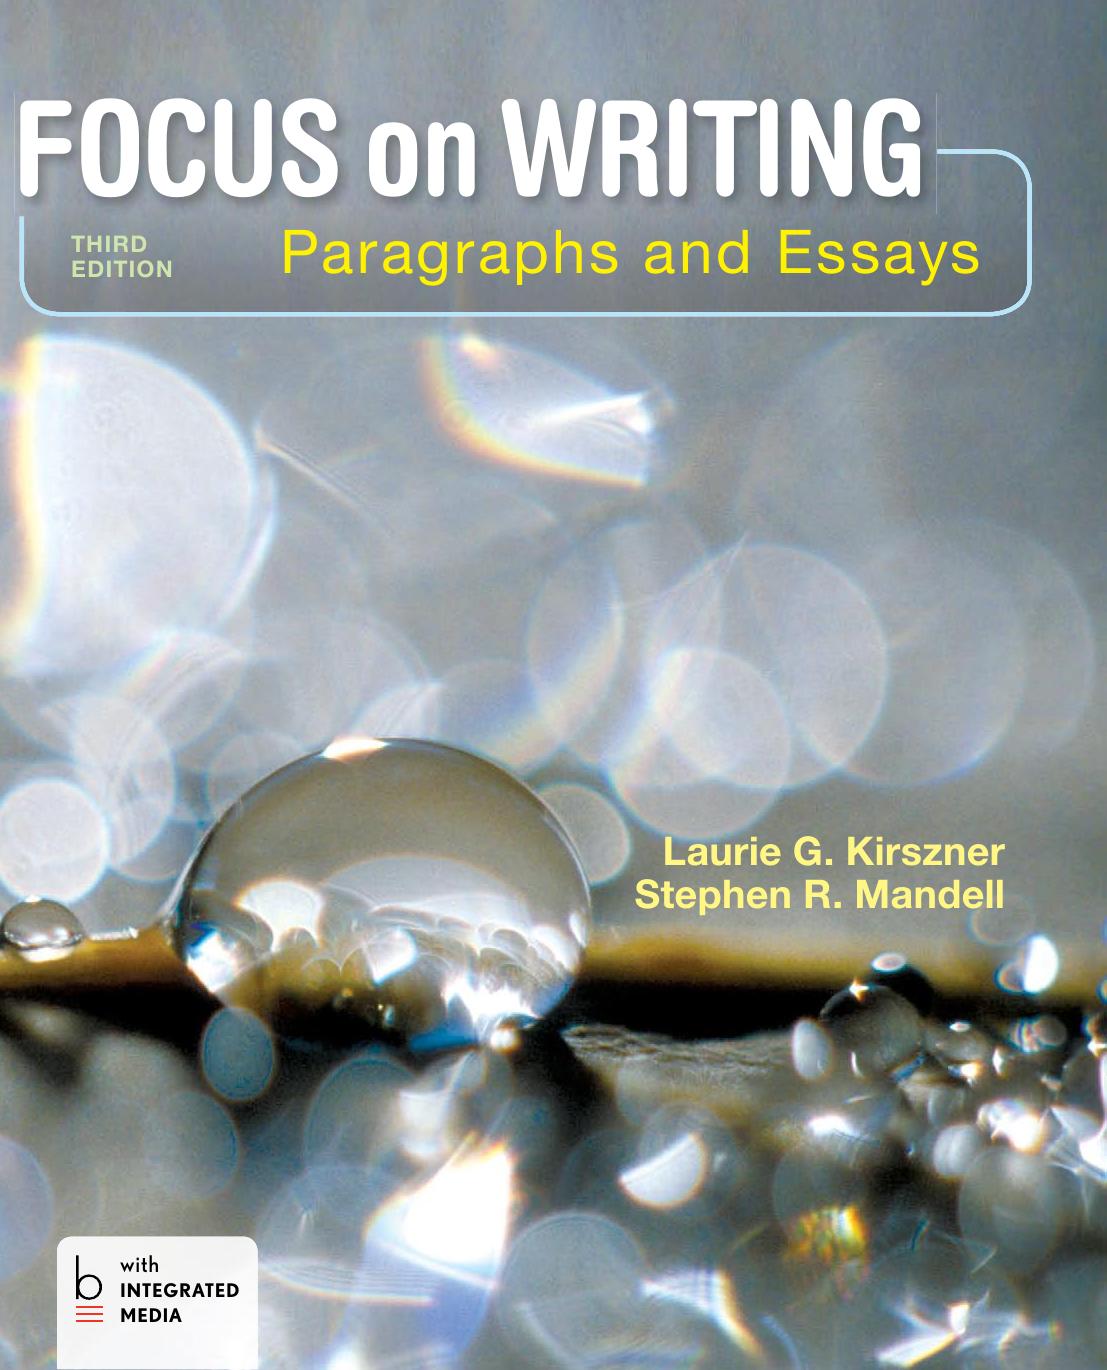 Focus on Writing Paragraphs and Essays 3rd Edition - Laurie G. Kirszner & Stephen R. Mandell.jpg